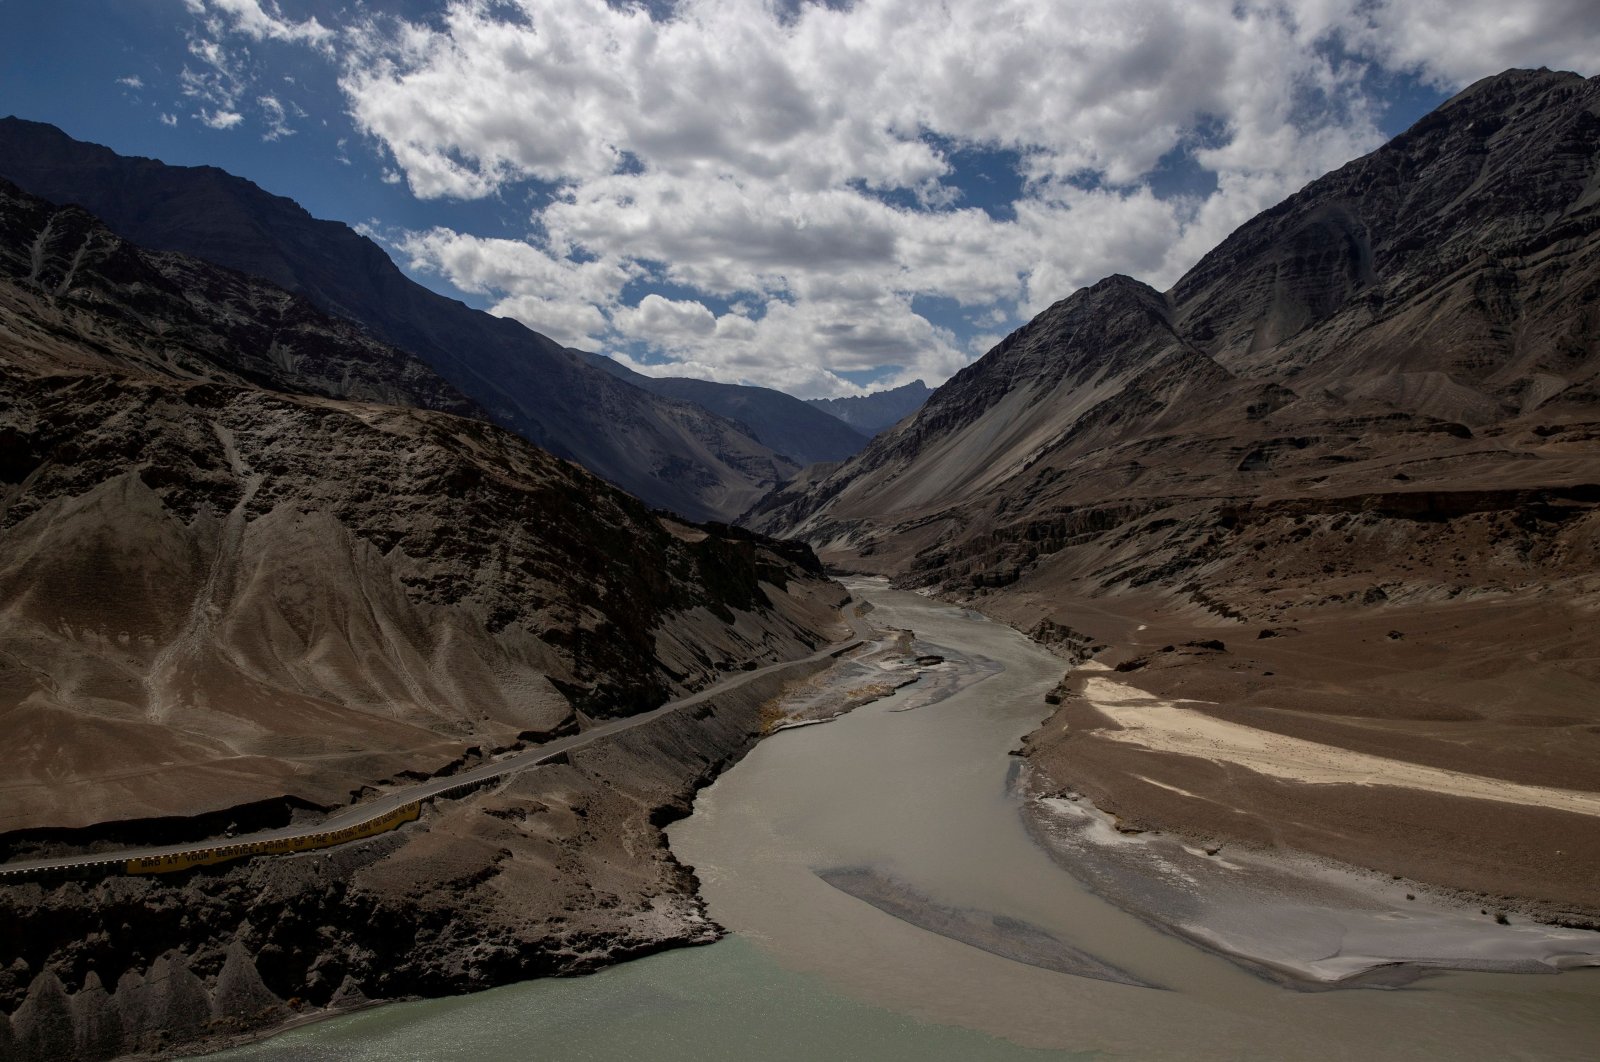 A highway being built by the Border Roads Organisation (BRO) passes by the confluence of the Indus and Zanskhar rivers in the Ladakh region, India, Sept. 17, 2020. (Reuters)